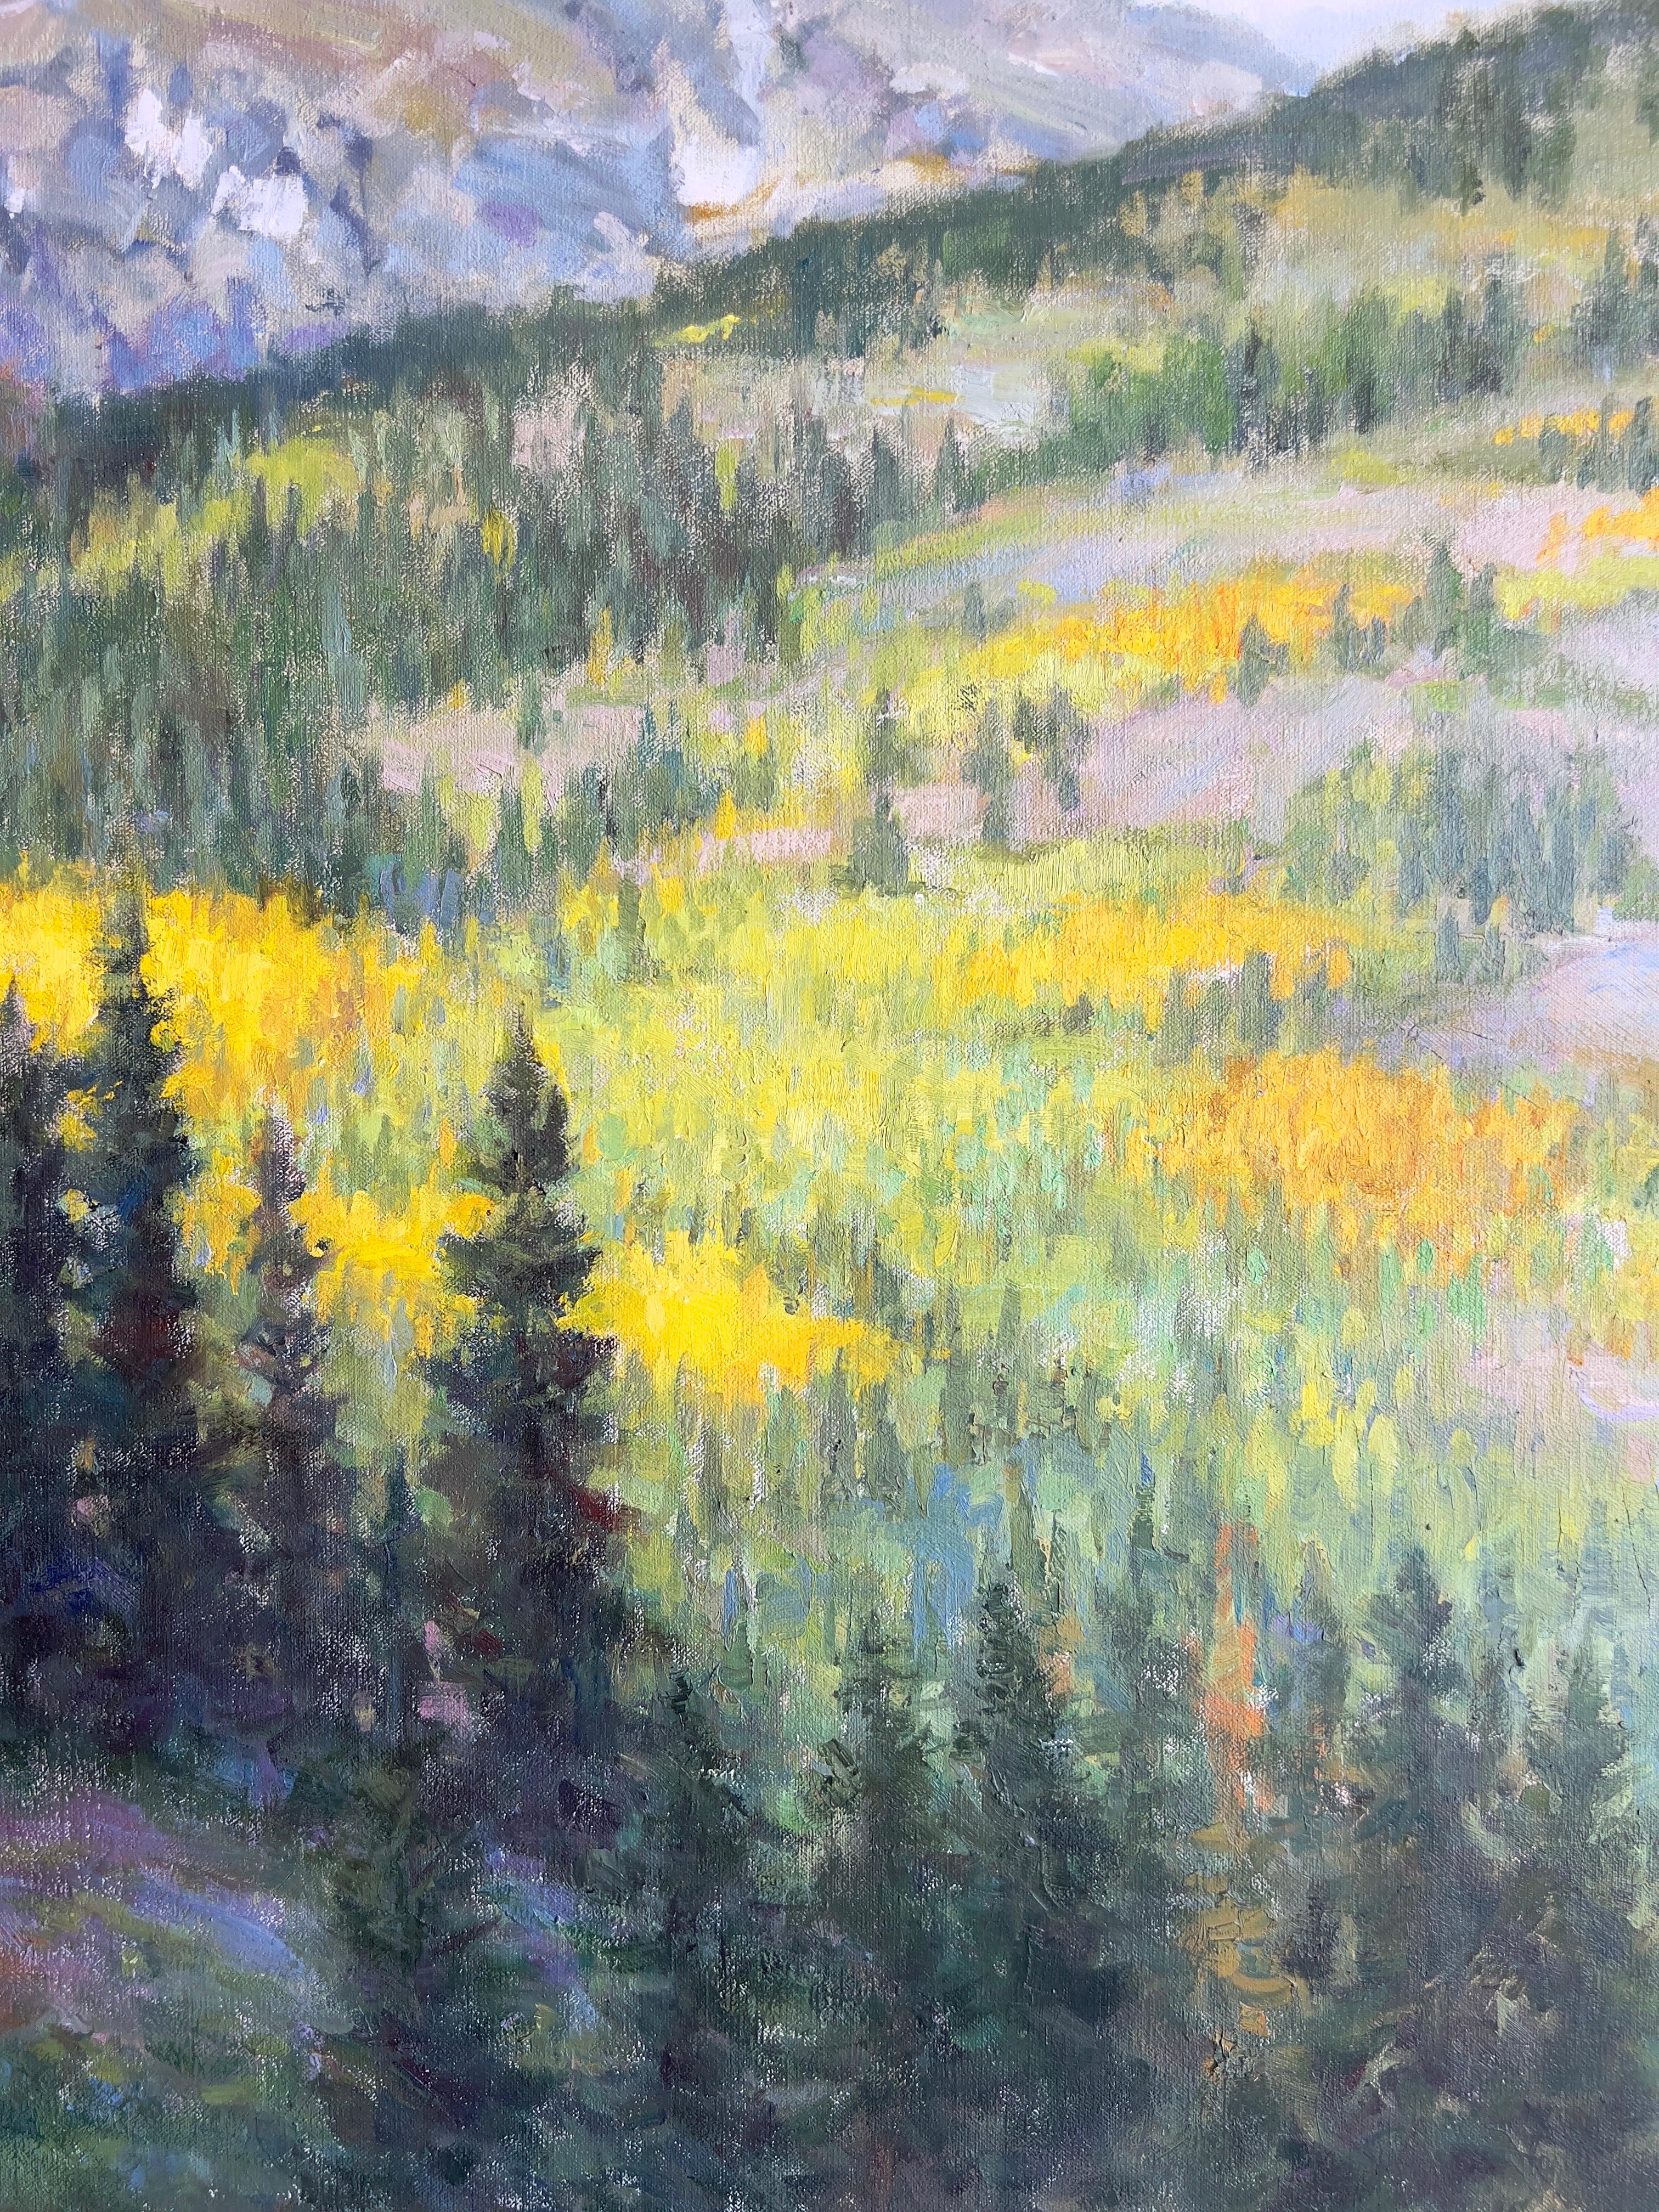 This stunning artwork was painted by artist Lynn Gertenbach at Silverton Canyon, California. Using a palette of primarily neutral colors, Gertenbach masterfully applied oil on canvas to create a truly captivating piece. The painting is in excellent